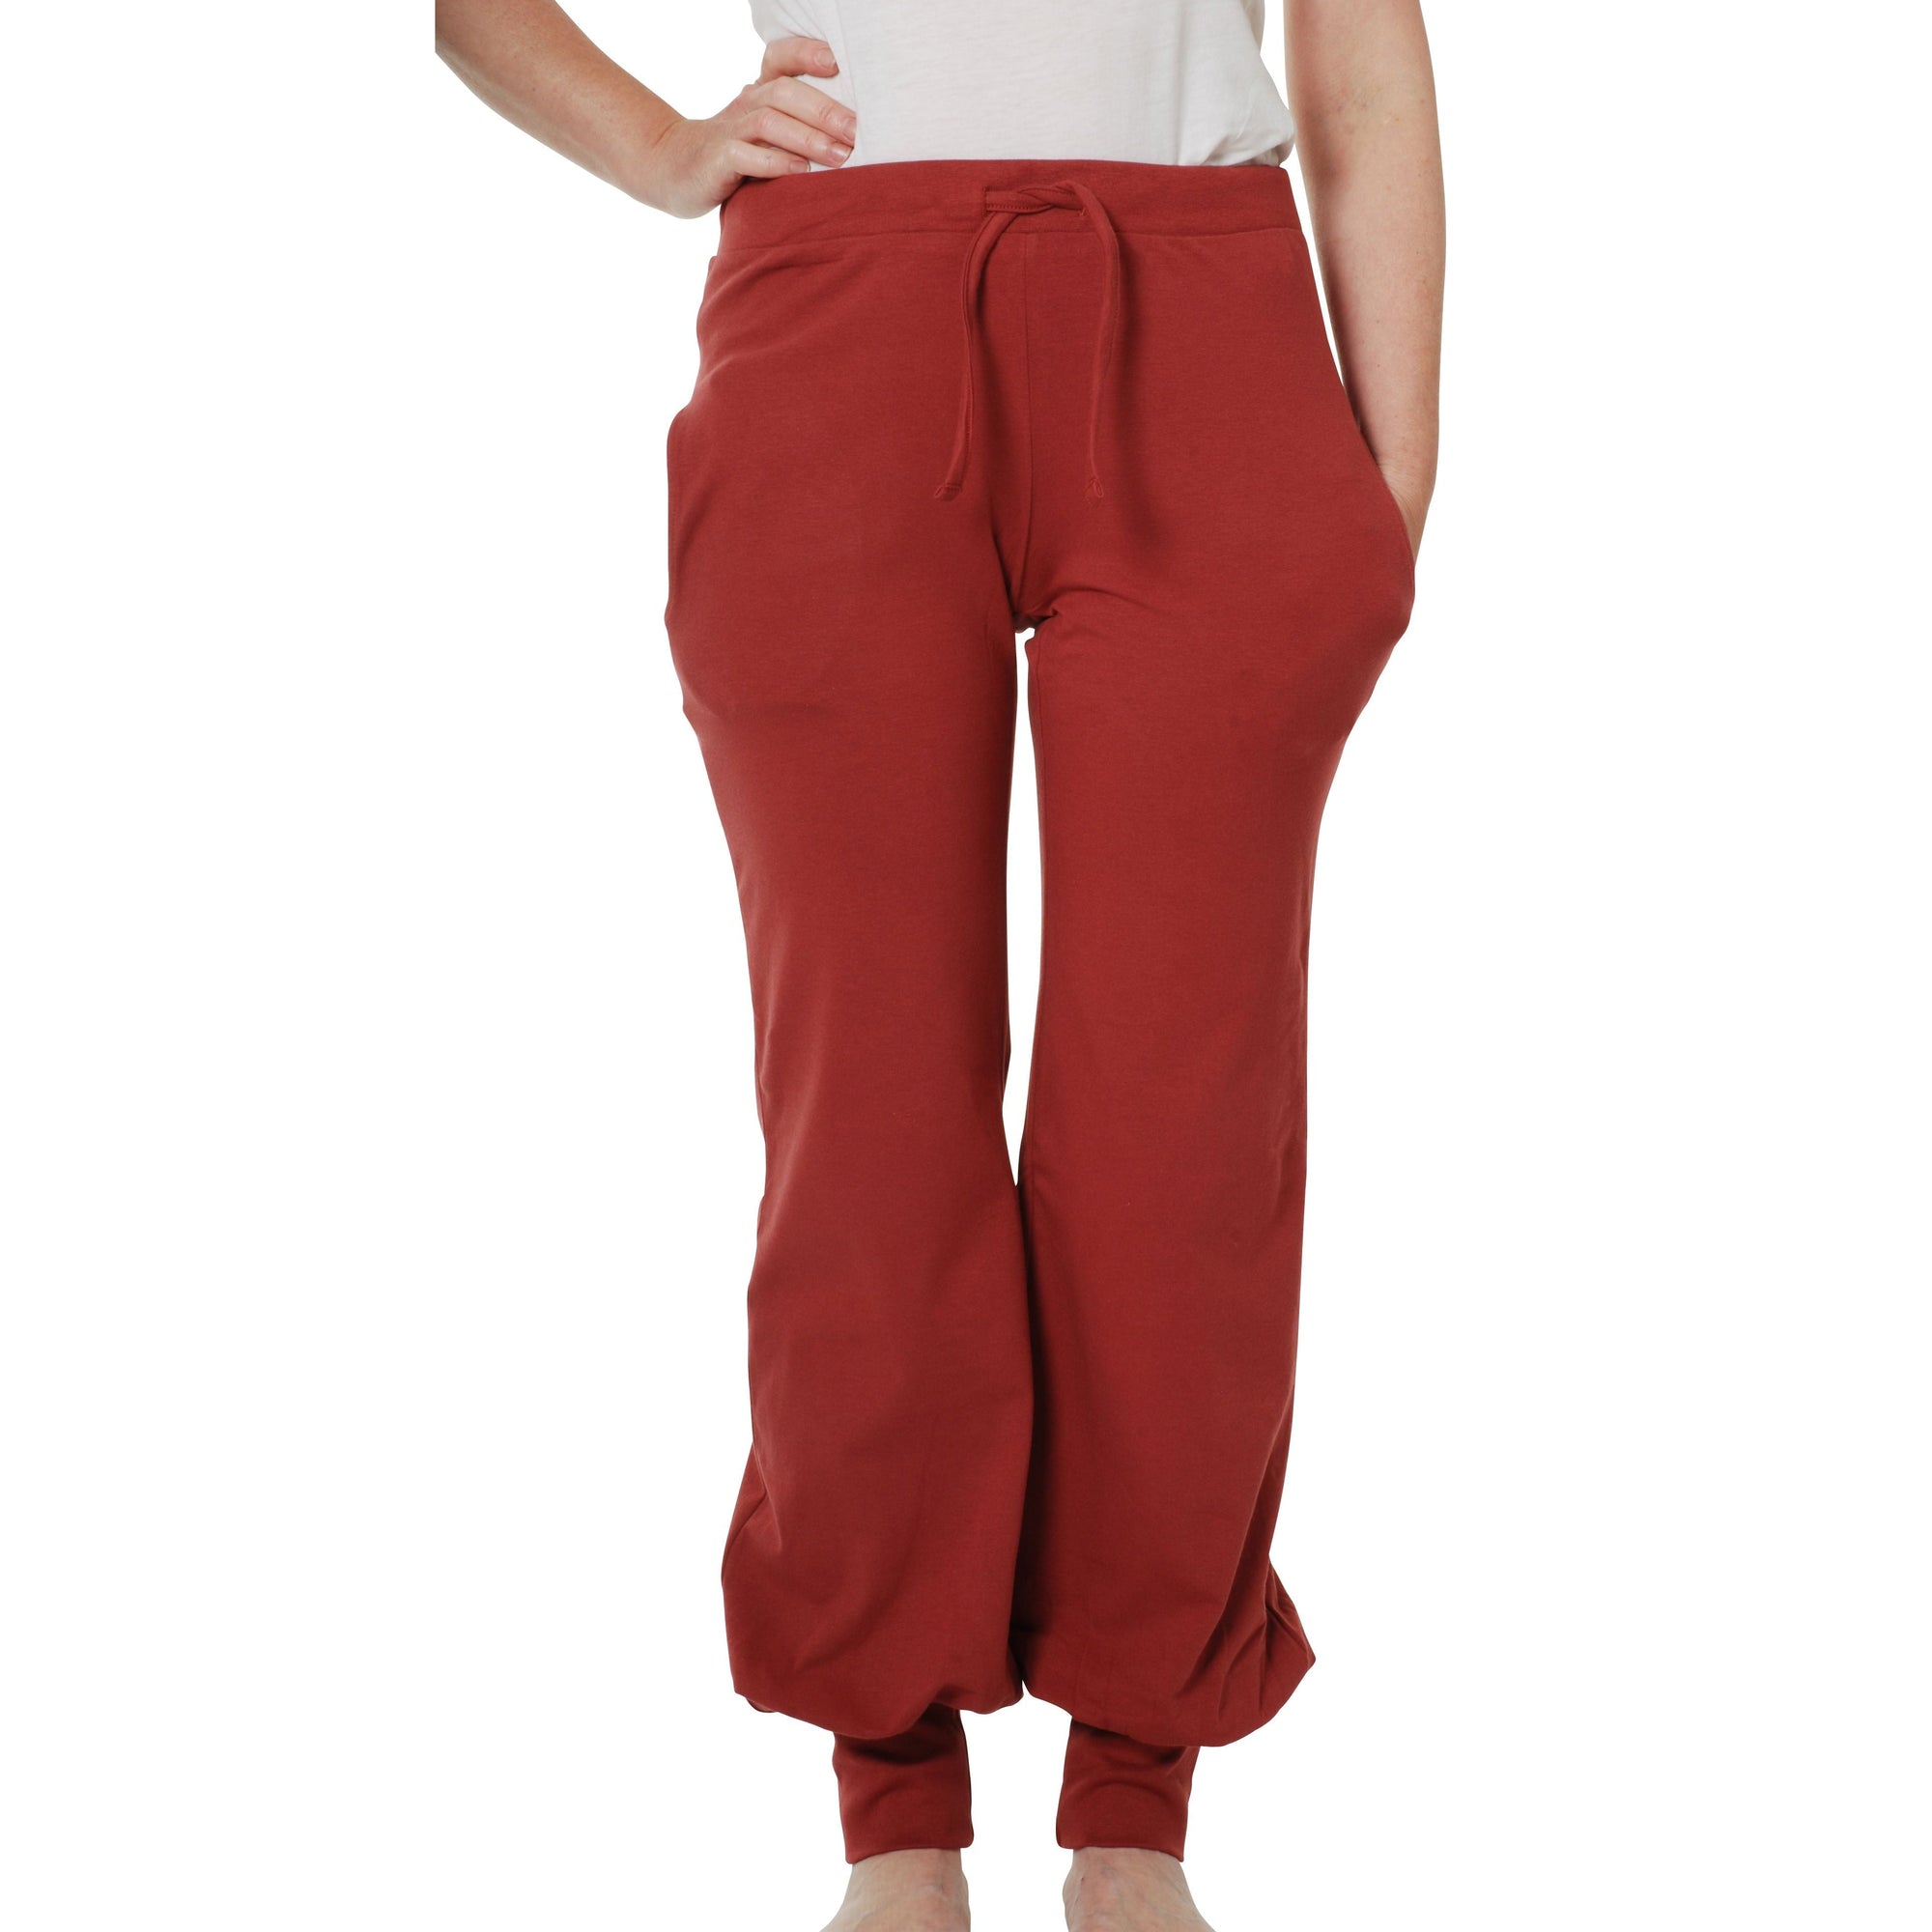 Adult's Brick Red Baggy Pants - 2 Left Size L-More Than A Fling-Modern Rascals